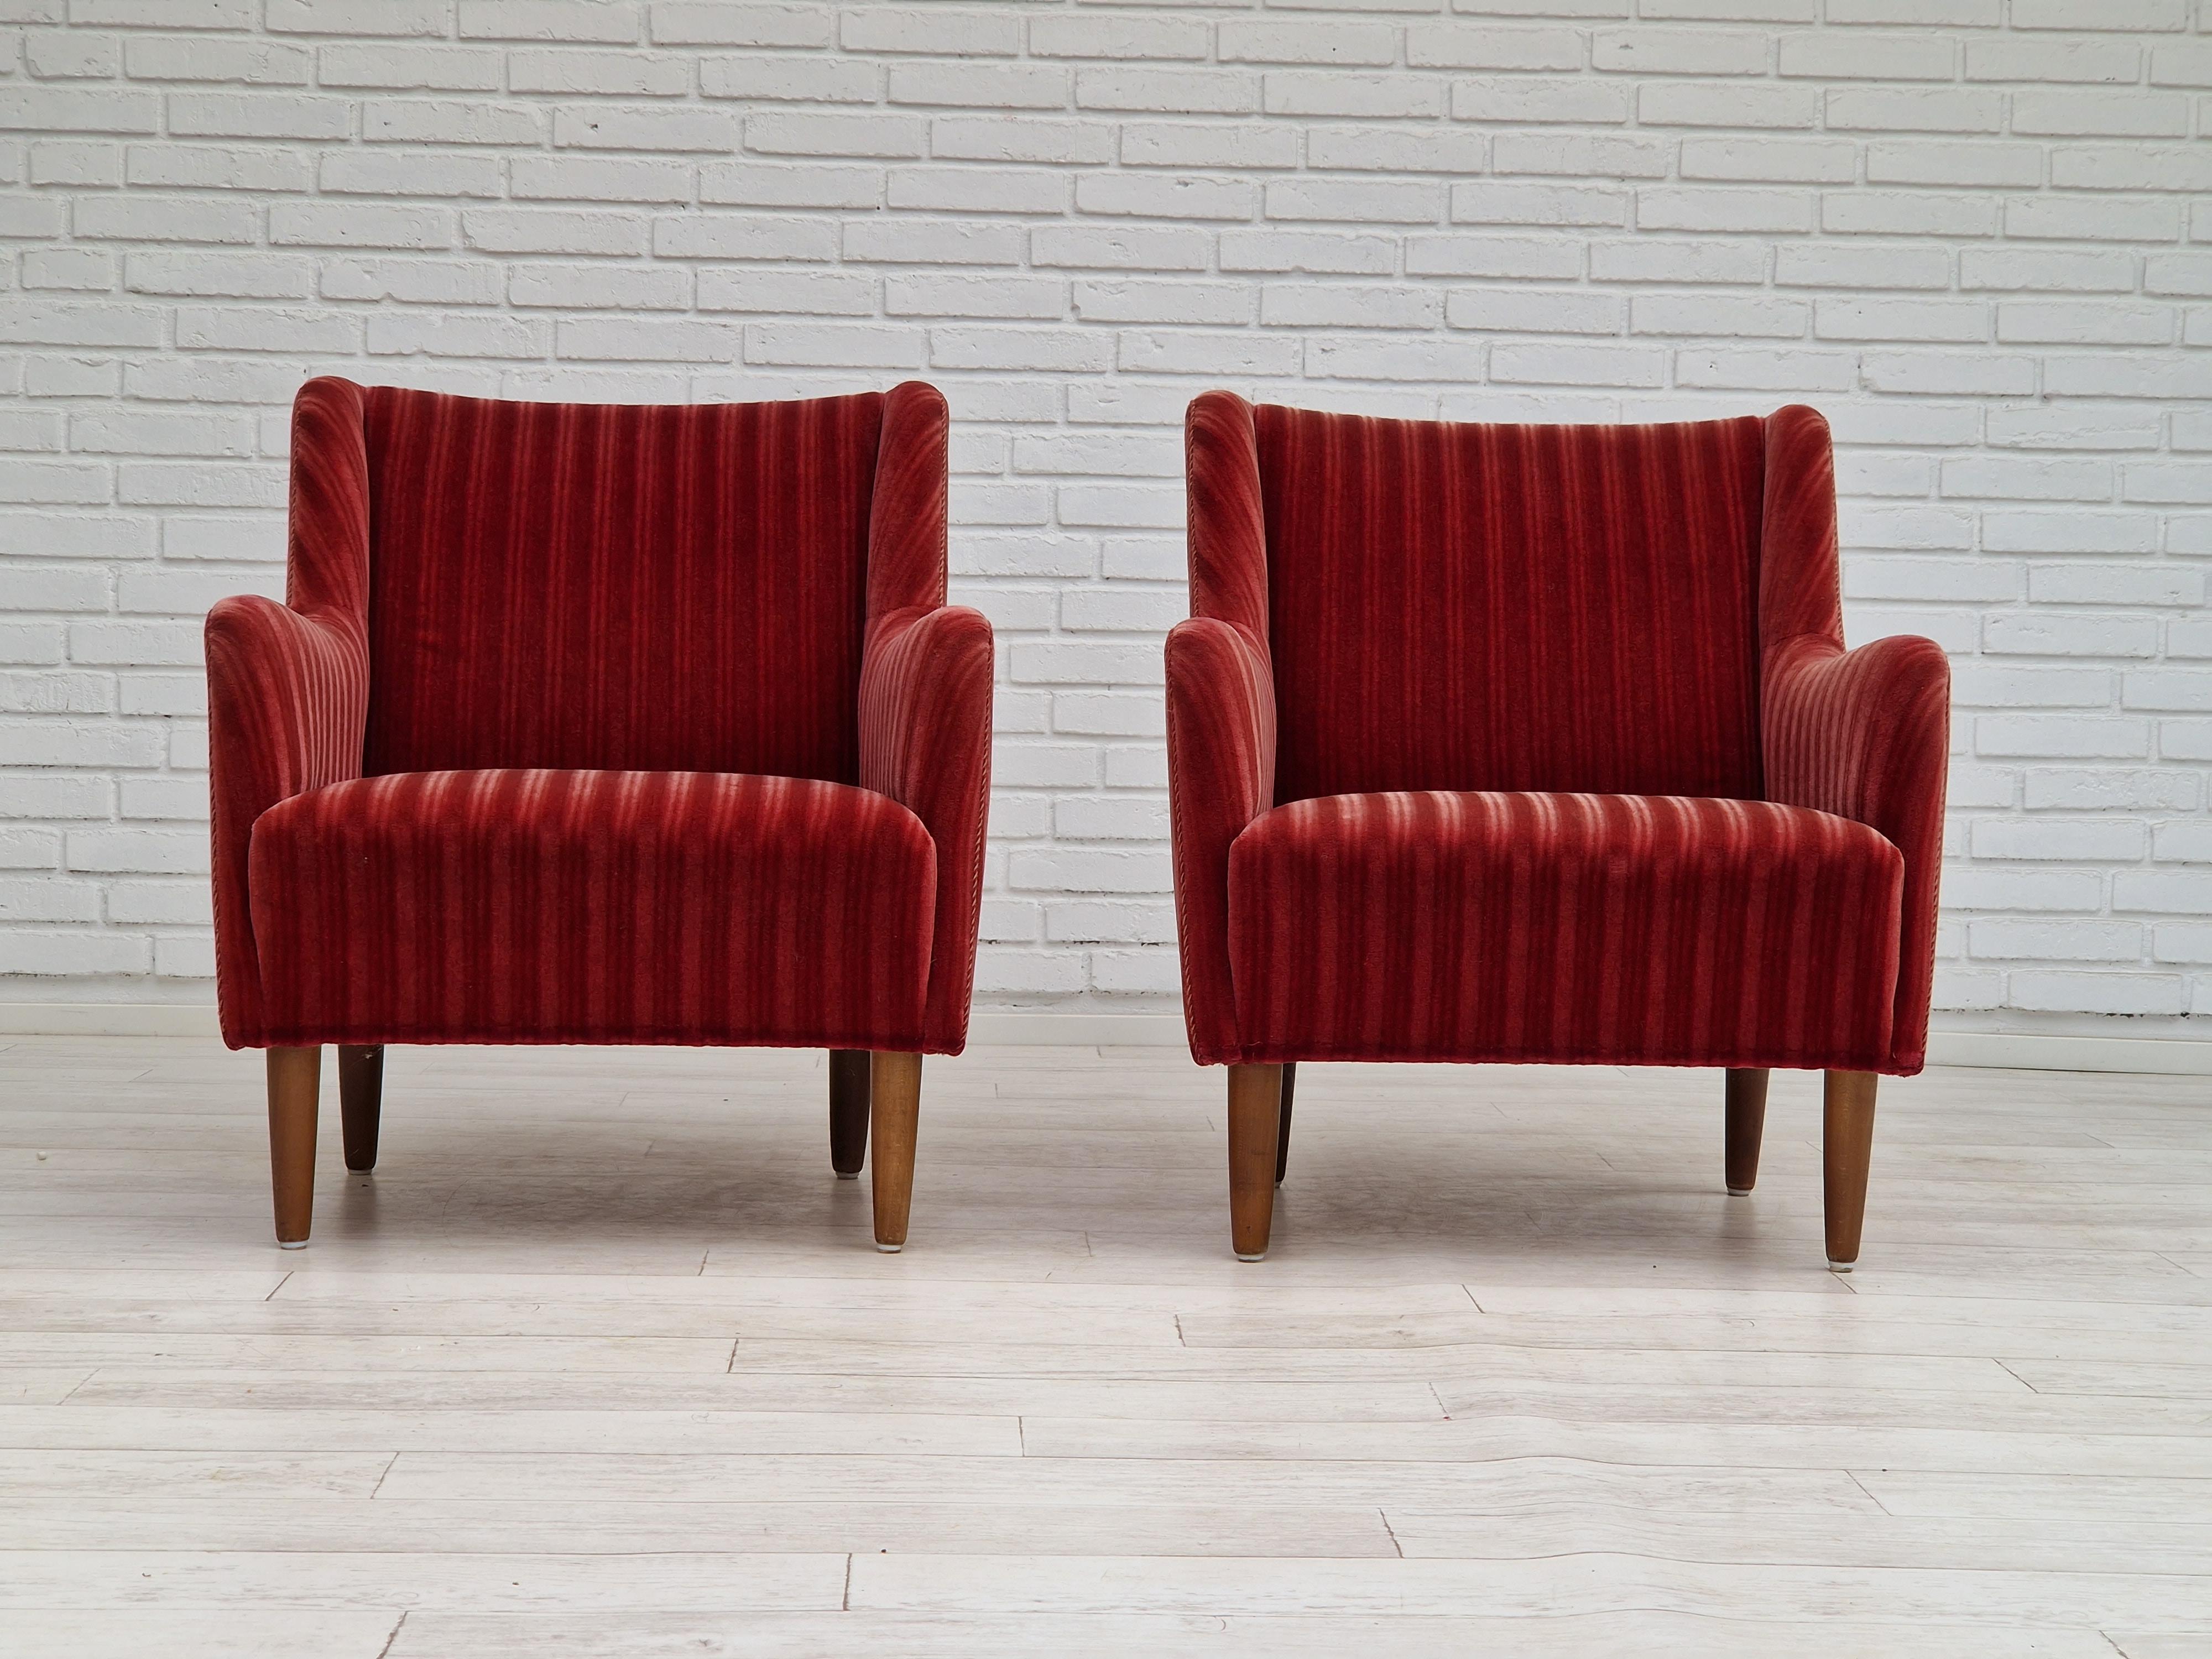 Mid-20th Century 1960s, Danish Design, Set of 2 Armchairs, Velour, Original Very Good Condition For Sale